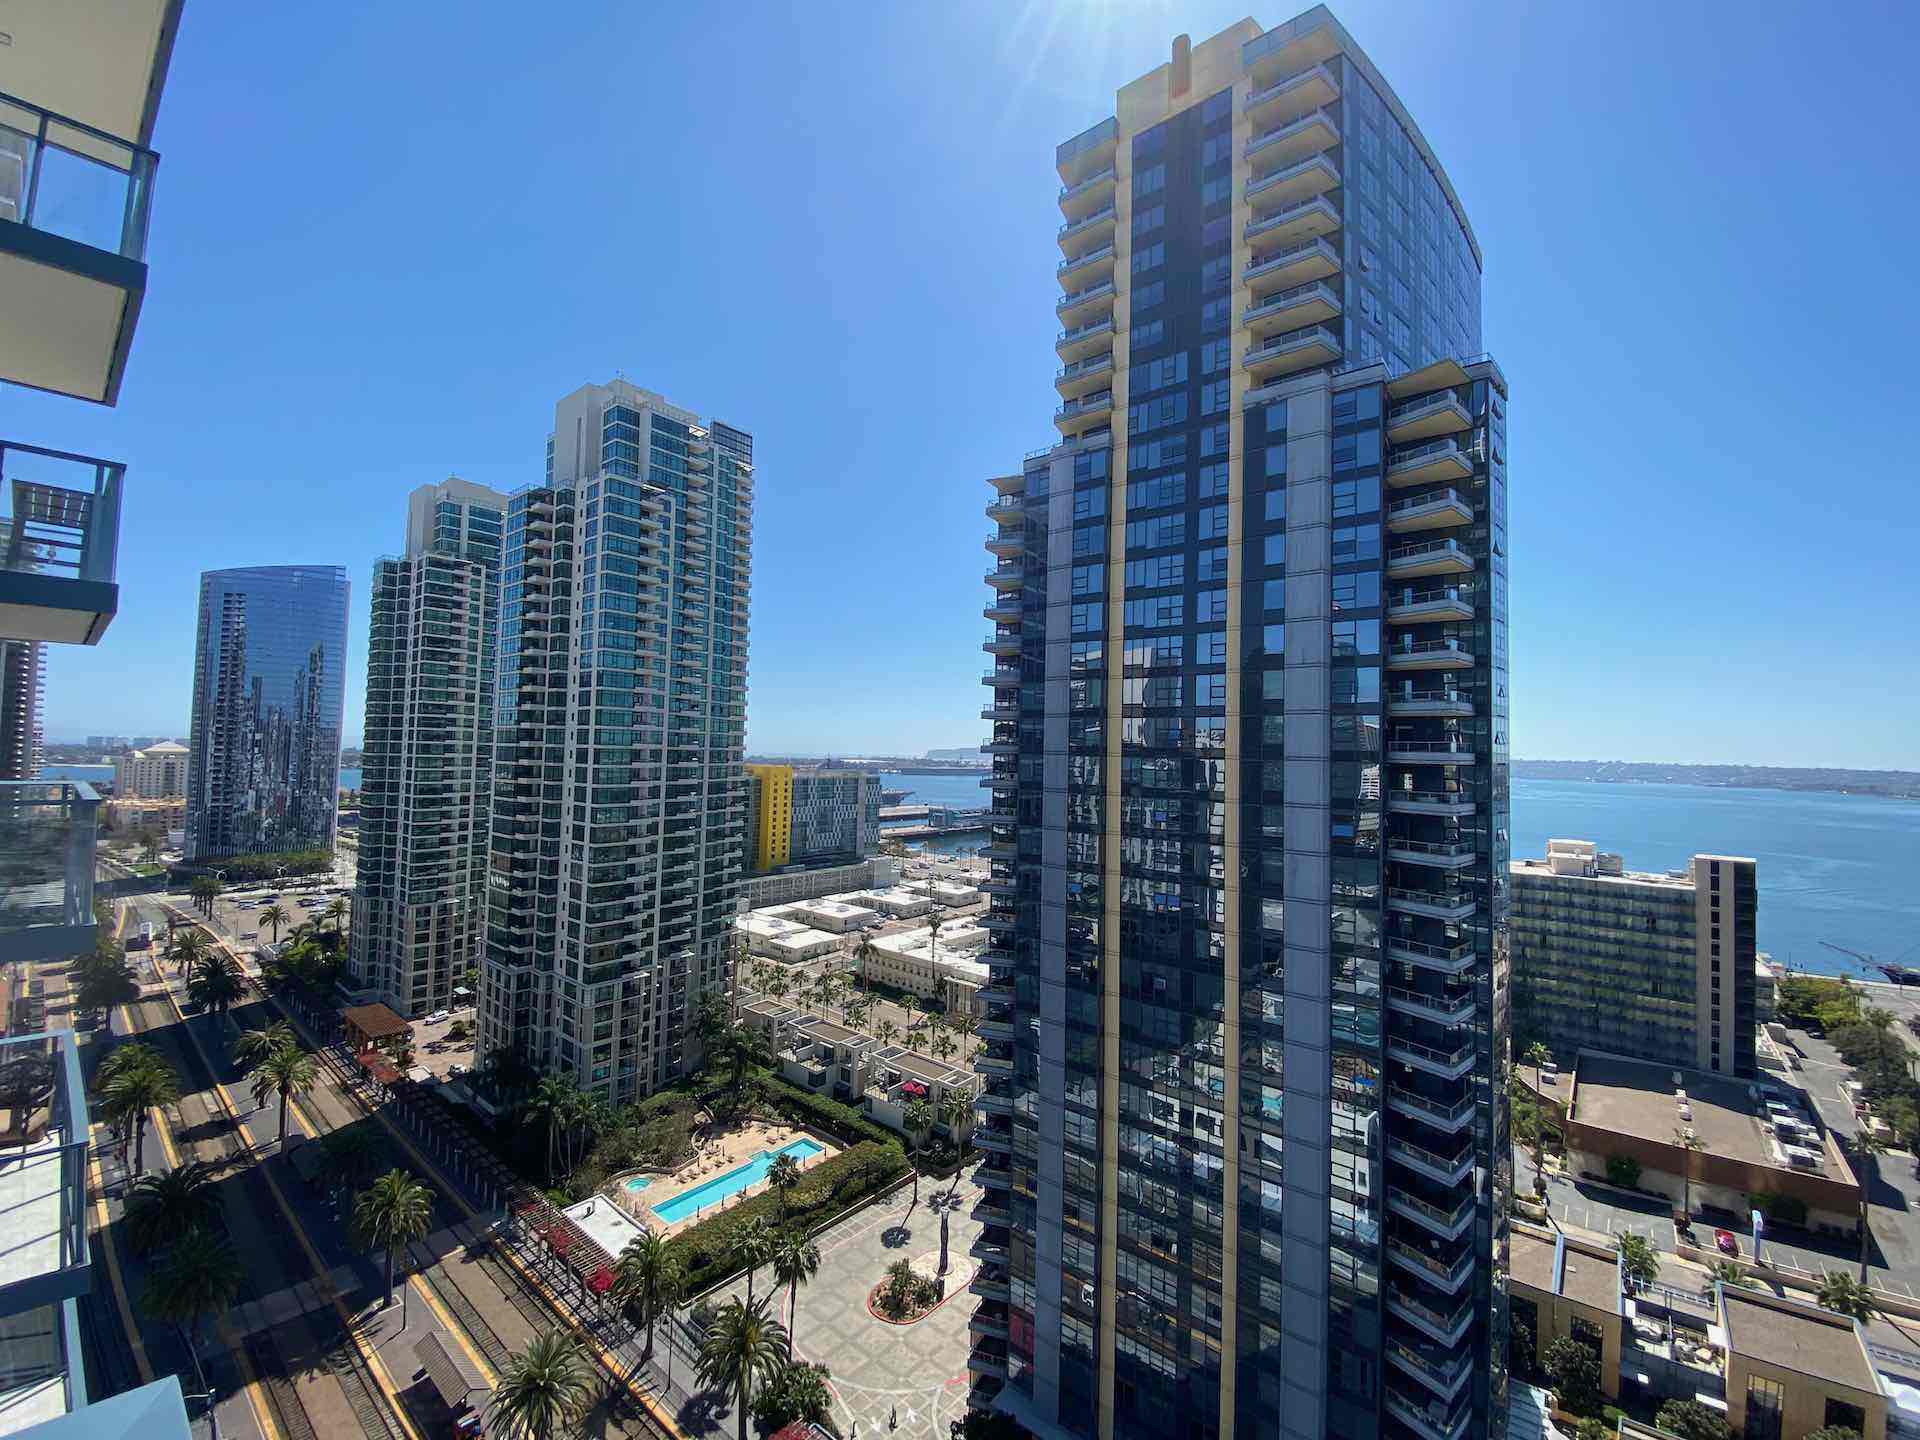 bayside condos in san diego downtown